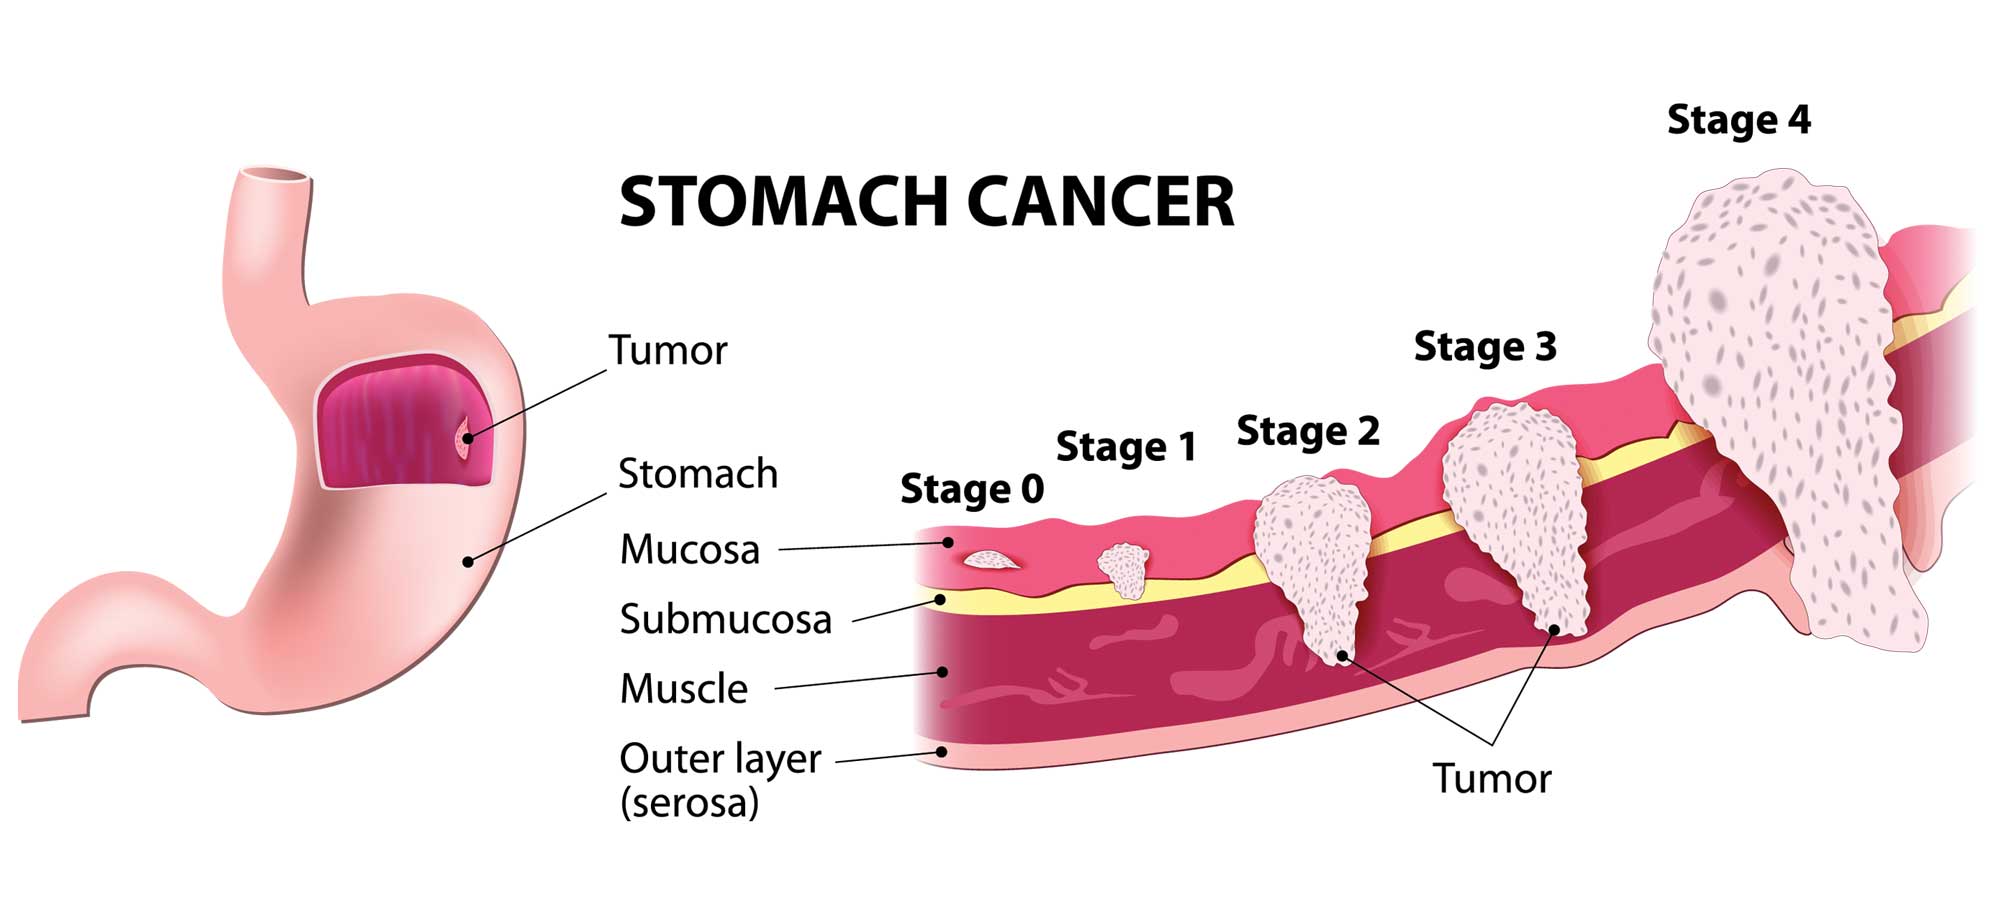 Stomach Cancer Treatment in Anchorage